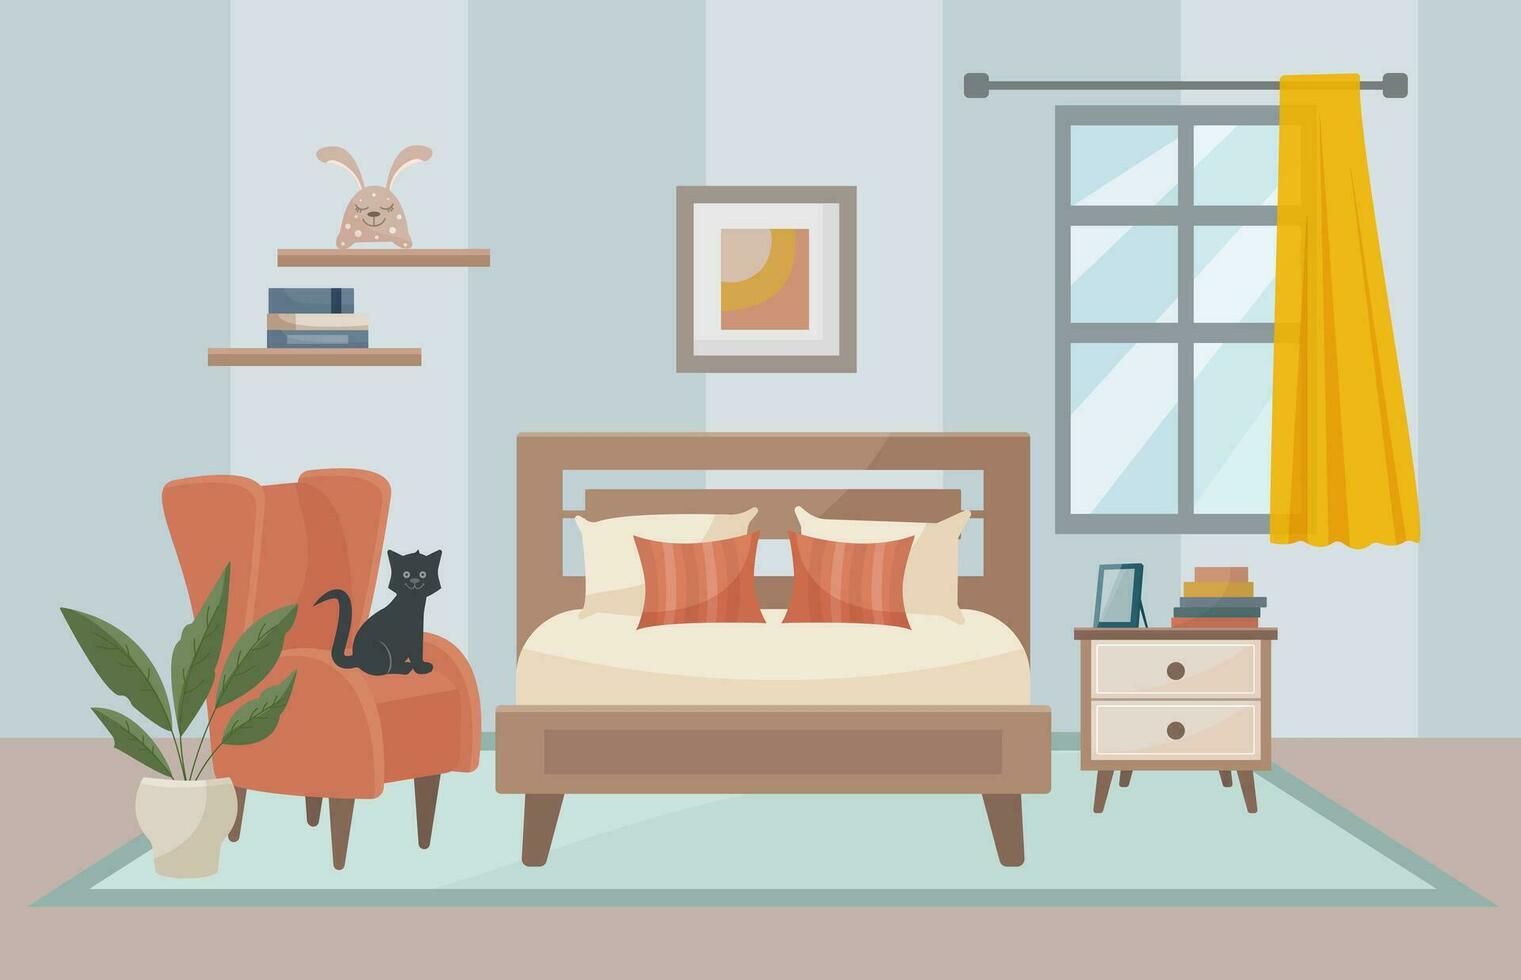 Bedroom interior armchair, bed, bedside table, photo frame, shelves, books, soft toy. Interior concept. Black cat on a chair. Vector flat illustration.